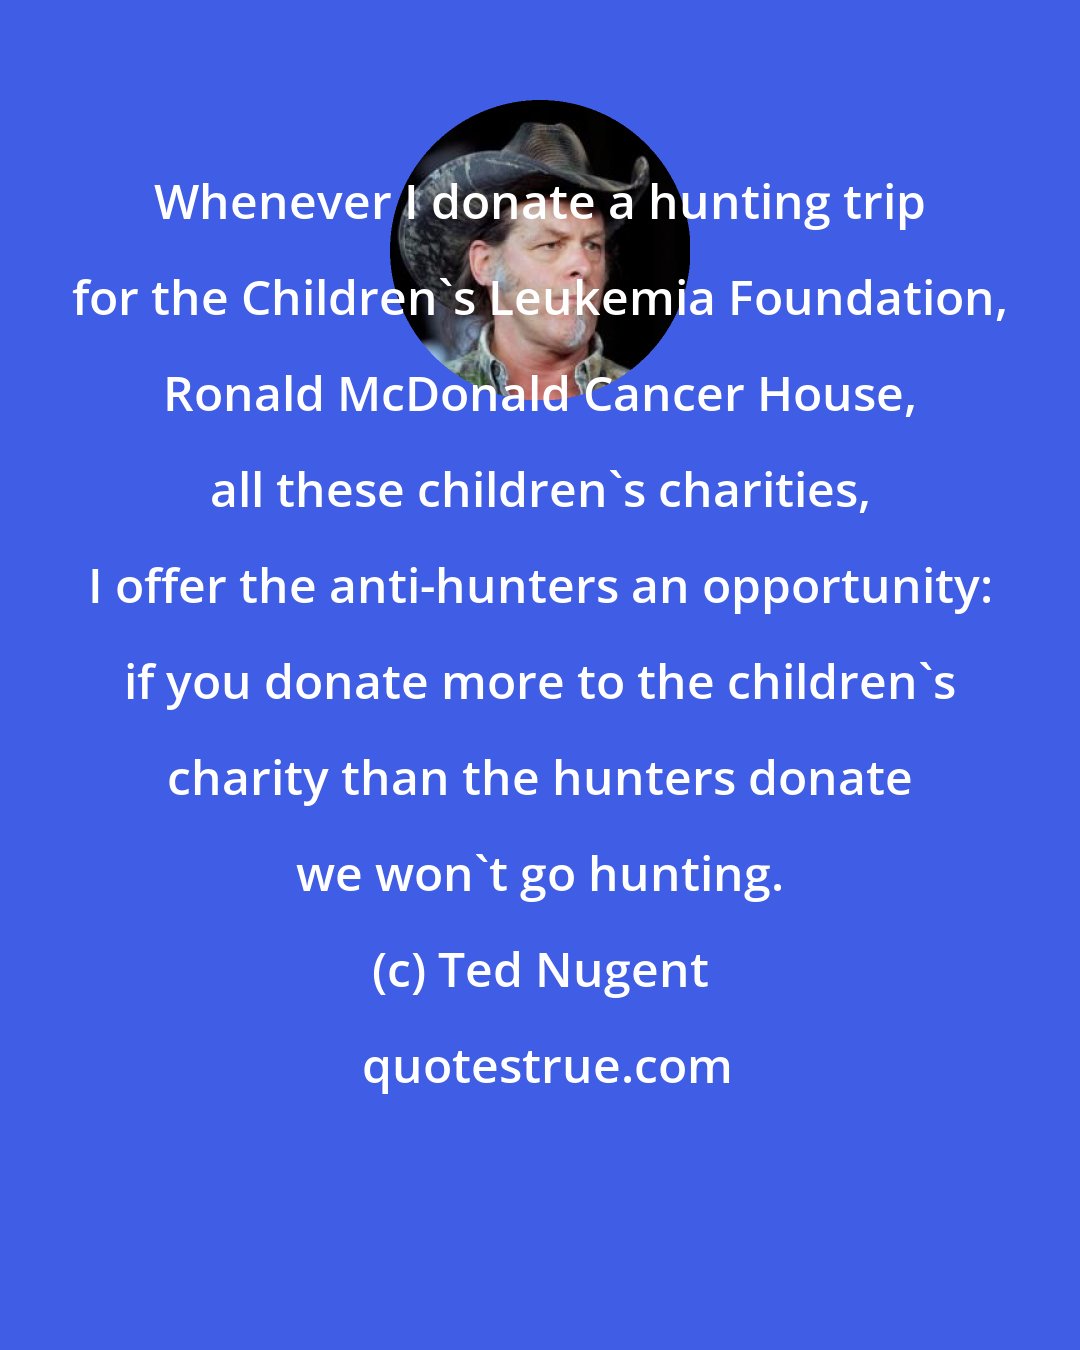 Ted Nugent: Whenever I donate a hunting trip for the Children's Leukemia Foundation, Ronald McDonald Cancer House, all these children's charities, I offer the anti-hunters an opportunity: if you donate more to the children's charity than the hunters donate we won't go hunting.